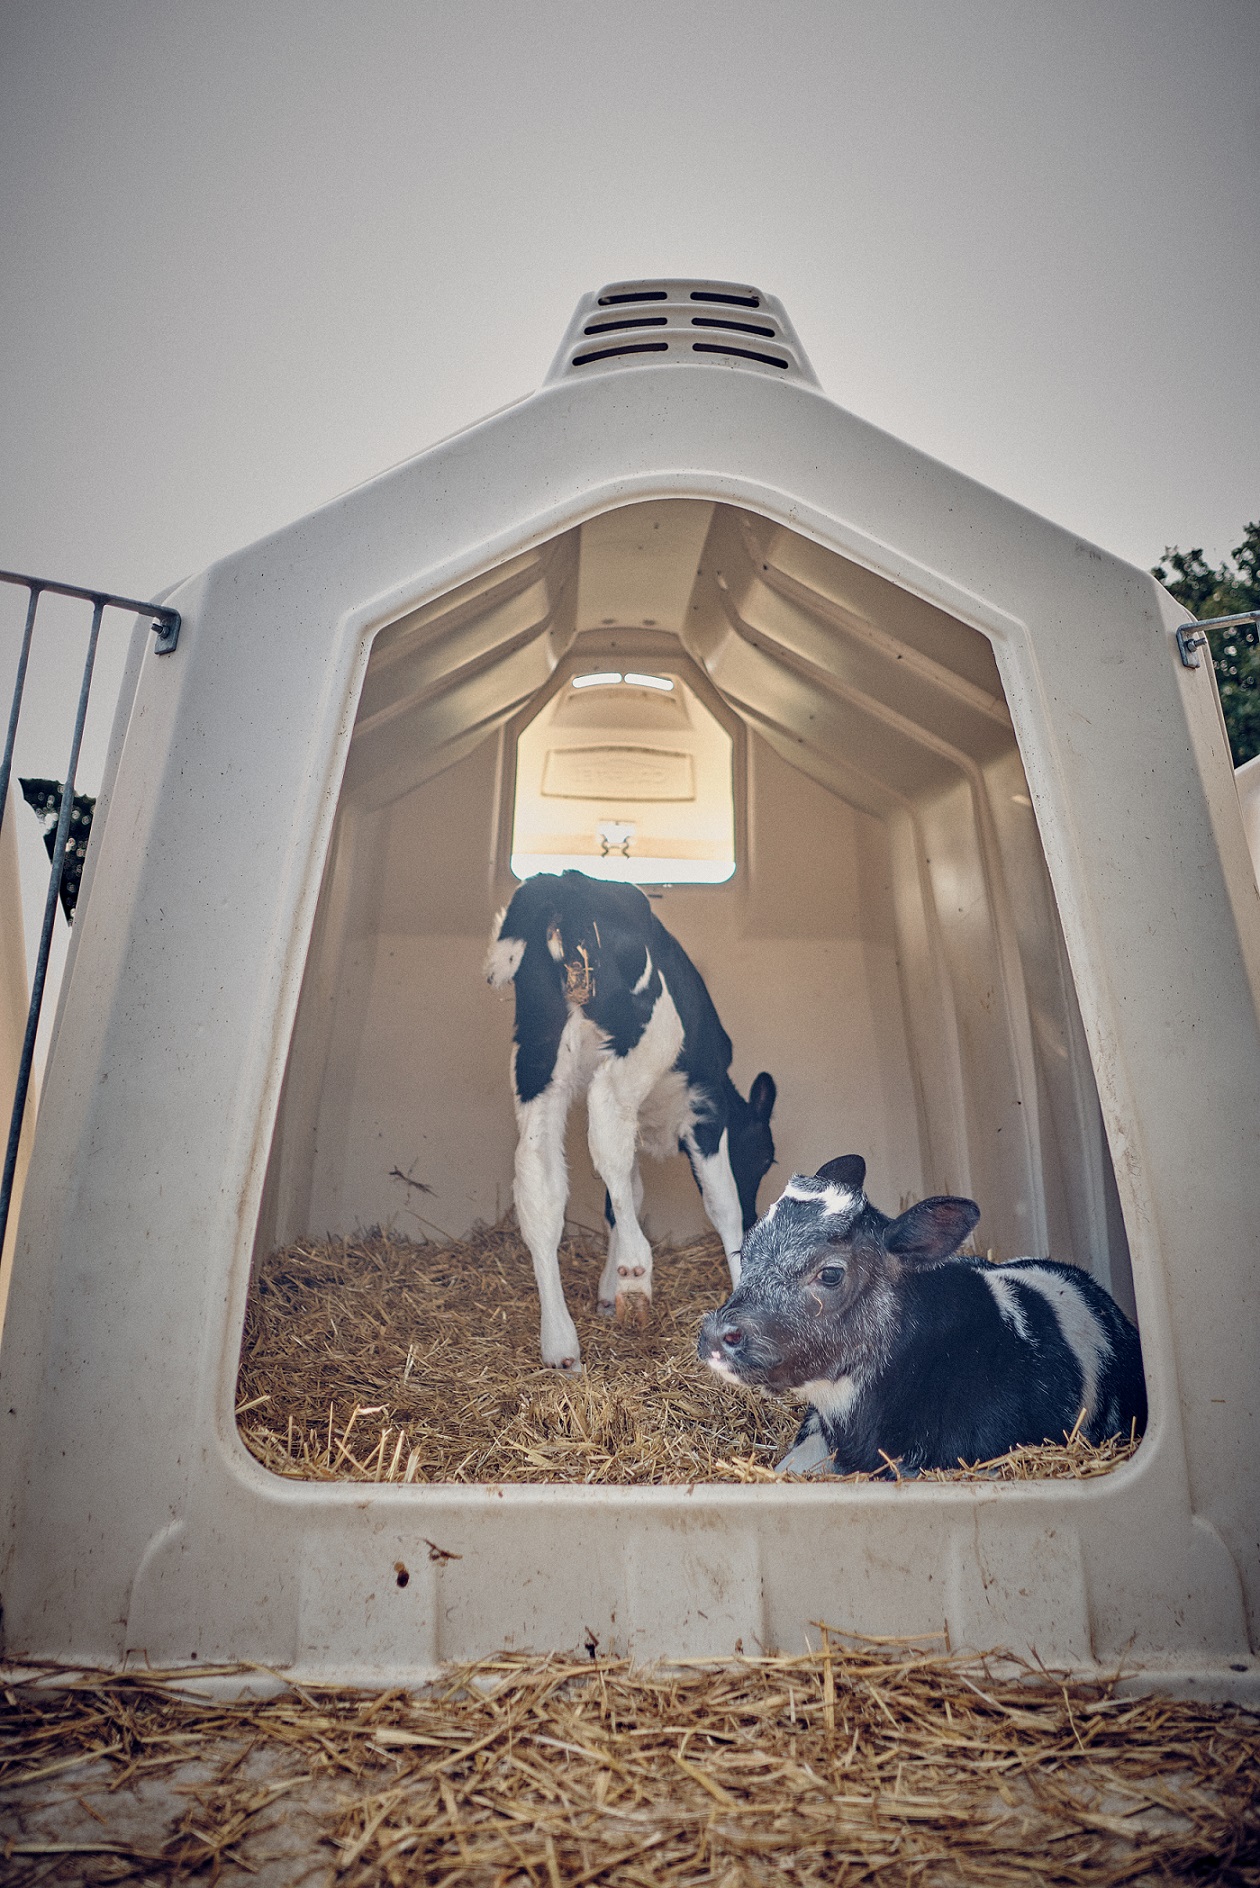 A straw-bedded paired hutch situated outside housing two calves, one standing up and one lying down.